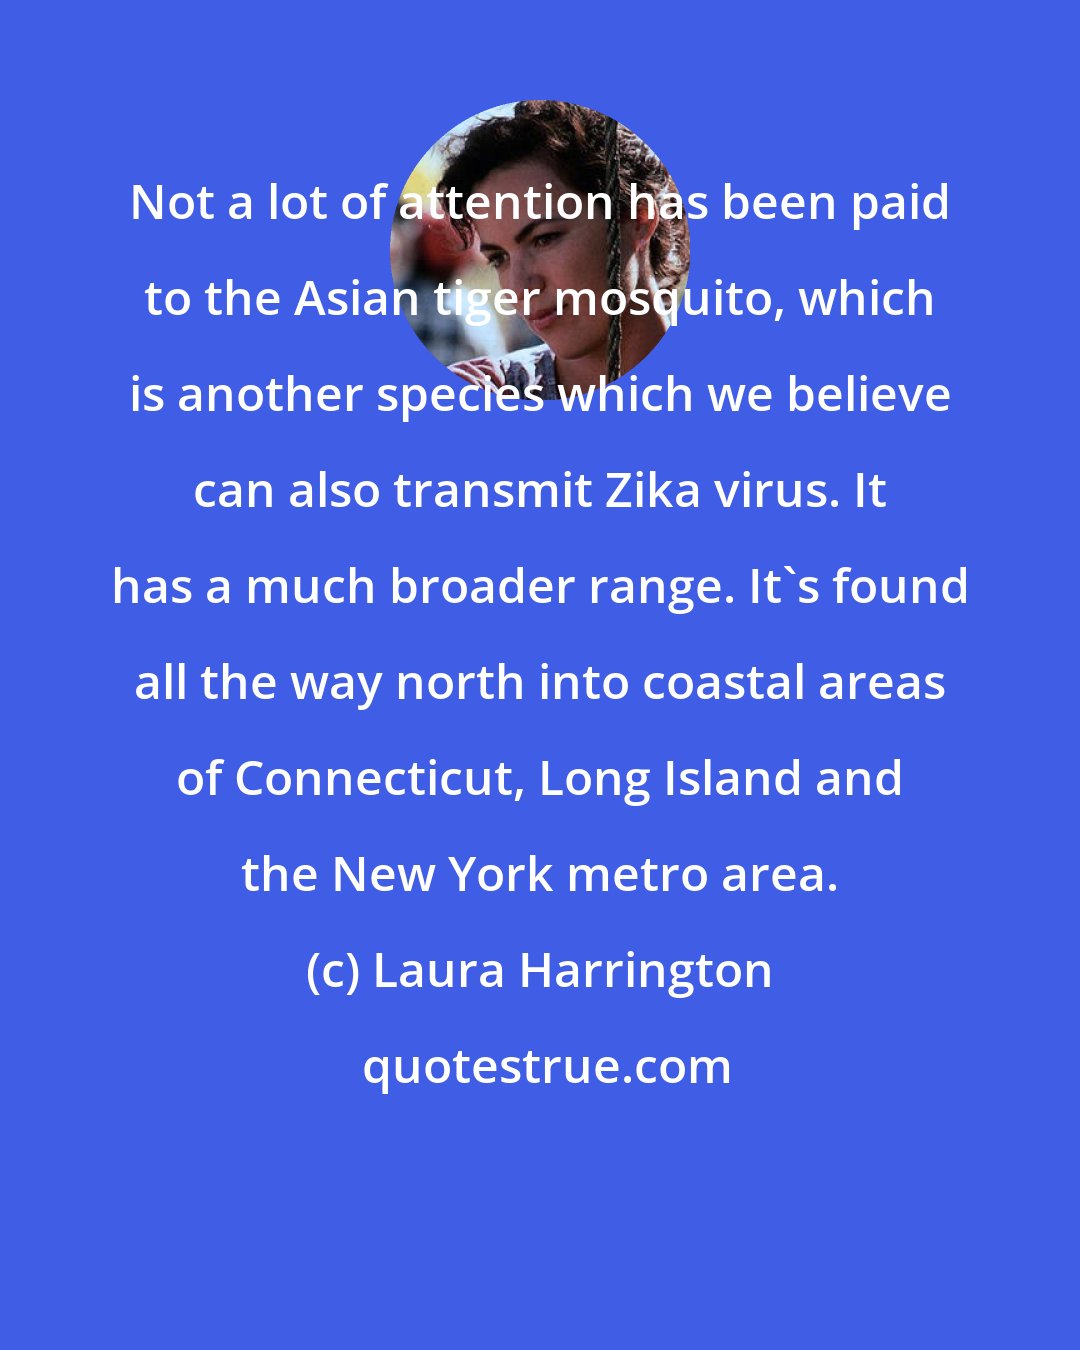 Laura Harrington: Not a lot of attention has been paid to the Asian tiger mosquito, which is another species which we believe can also transmit Zika virus. It has a much broader range. It's found all the way north into coastal areas of Connecticut, Long Island and the New York metro area.